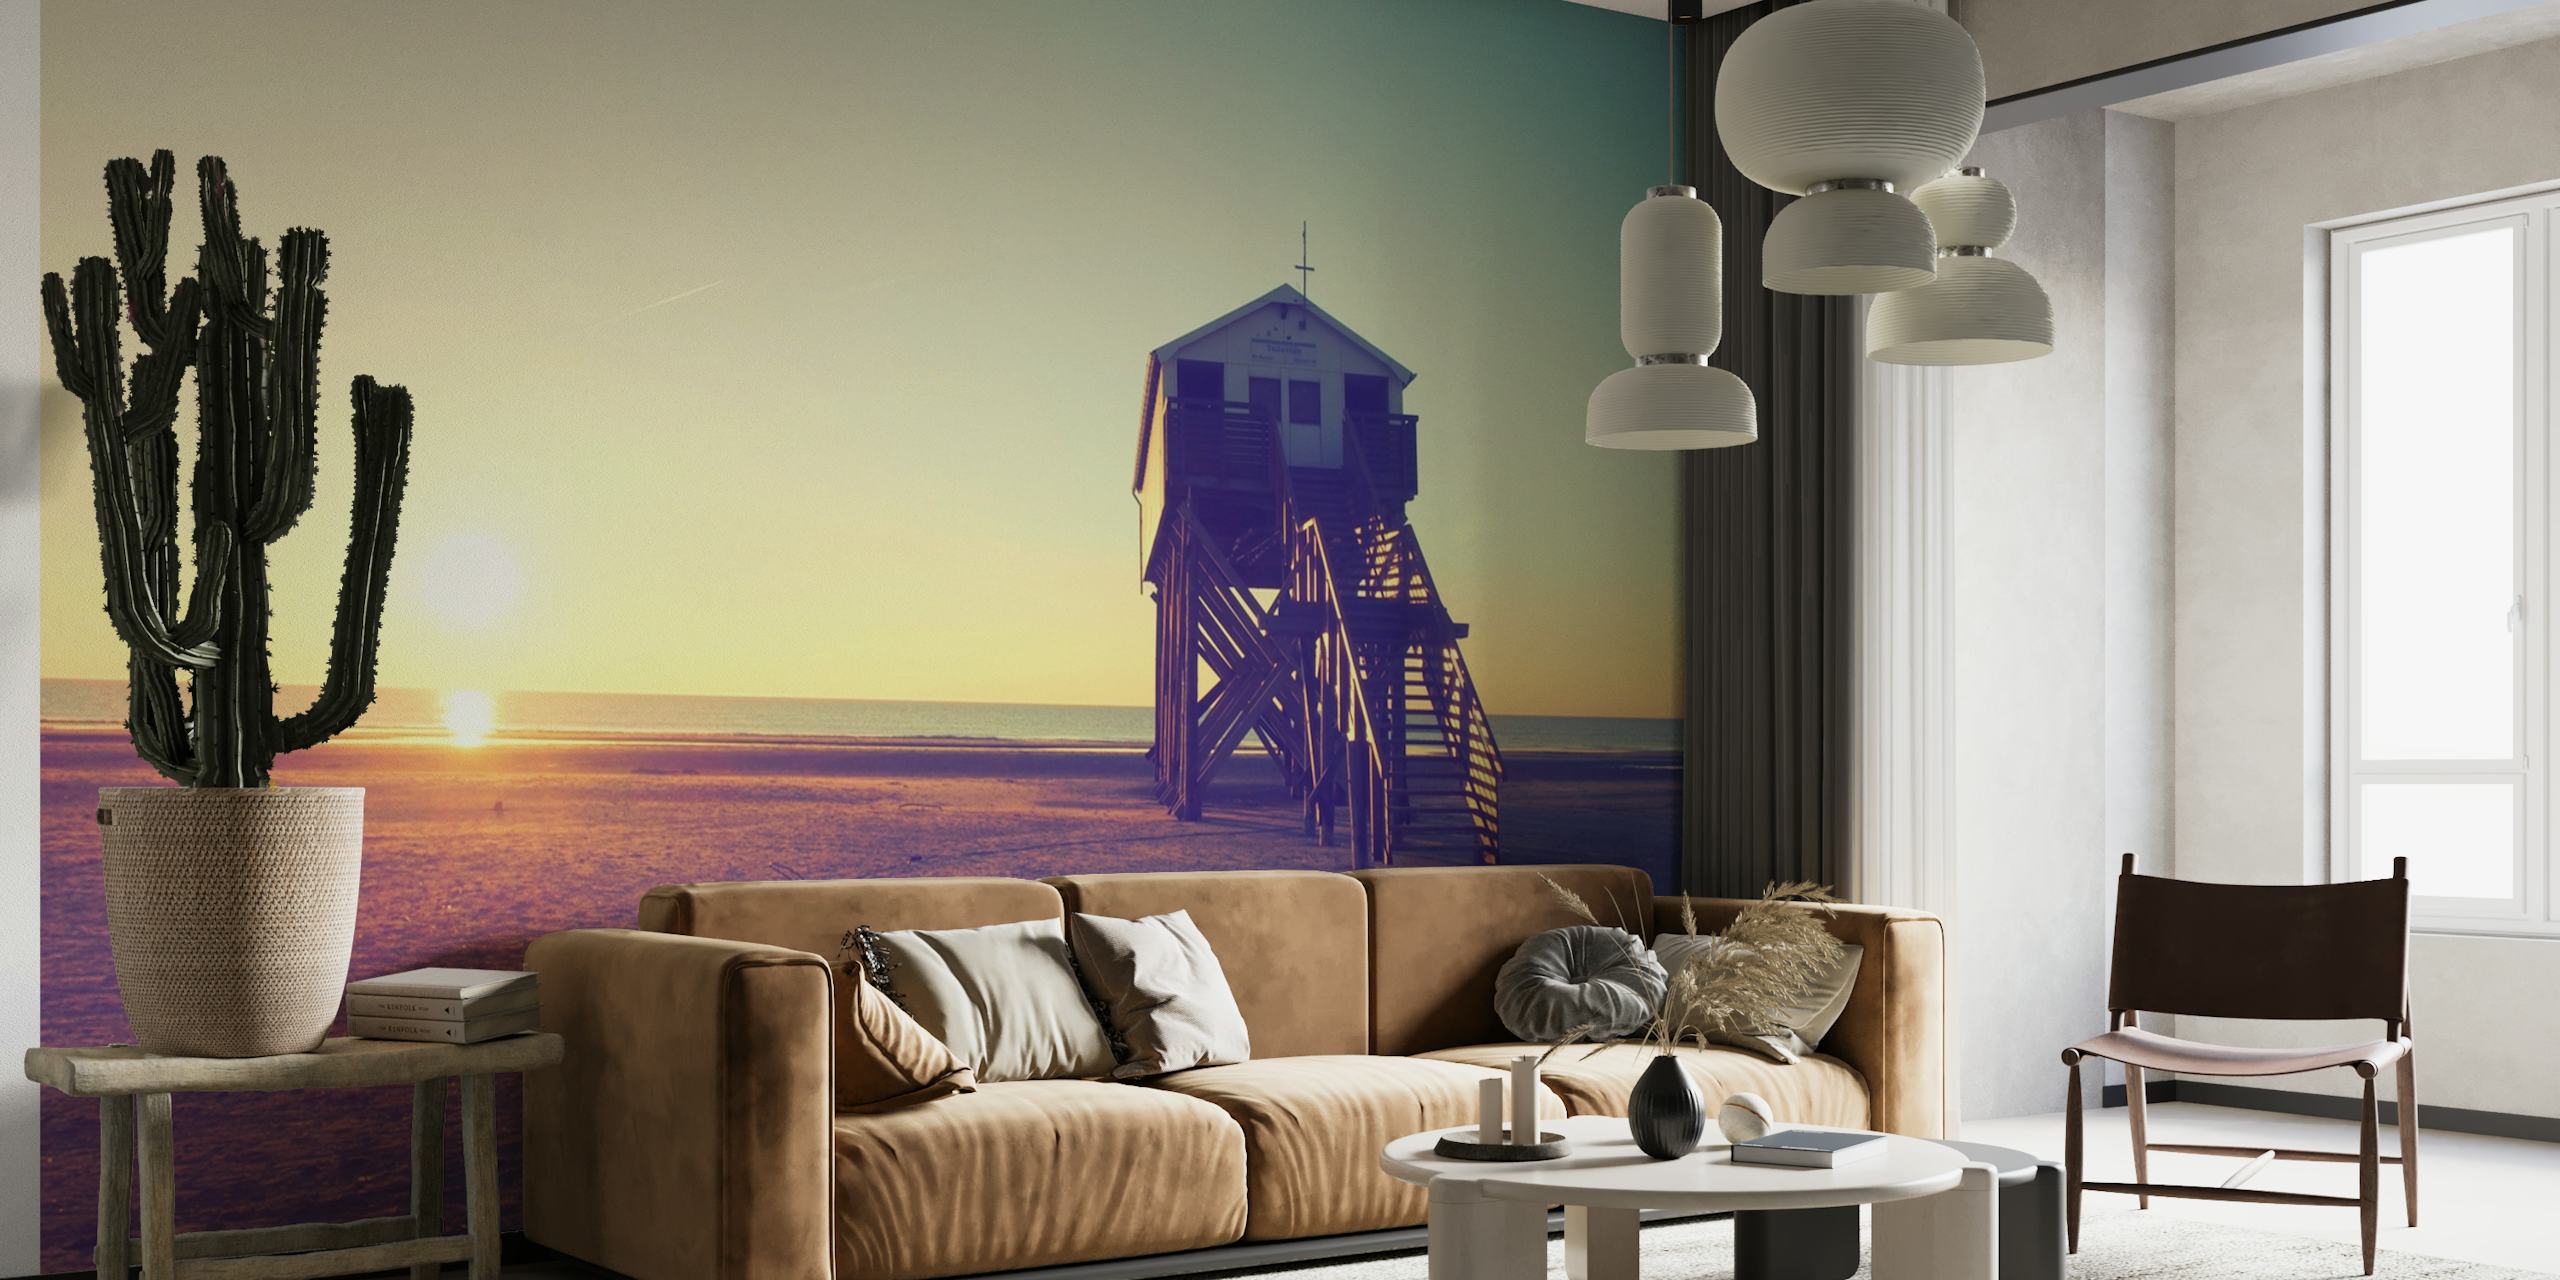 Coastal sunset wall mural with beach house silhouette